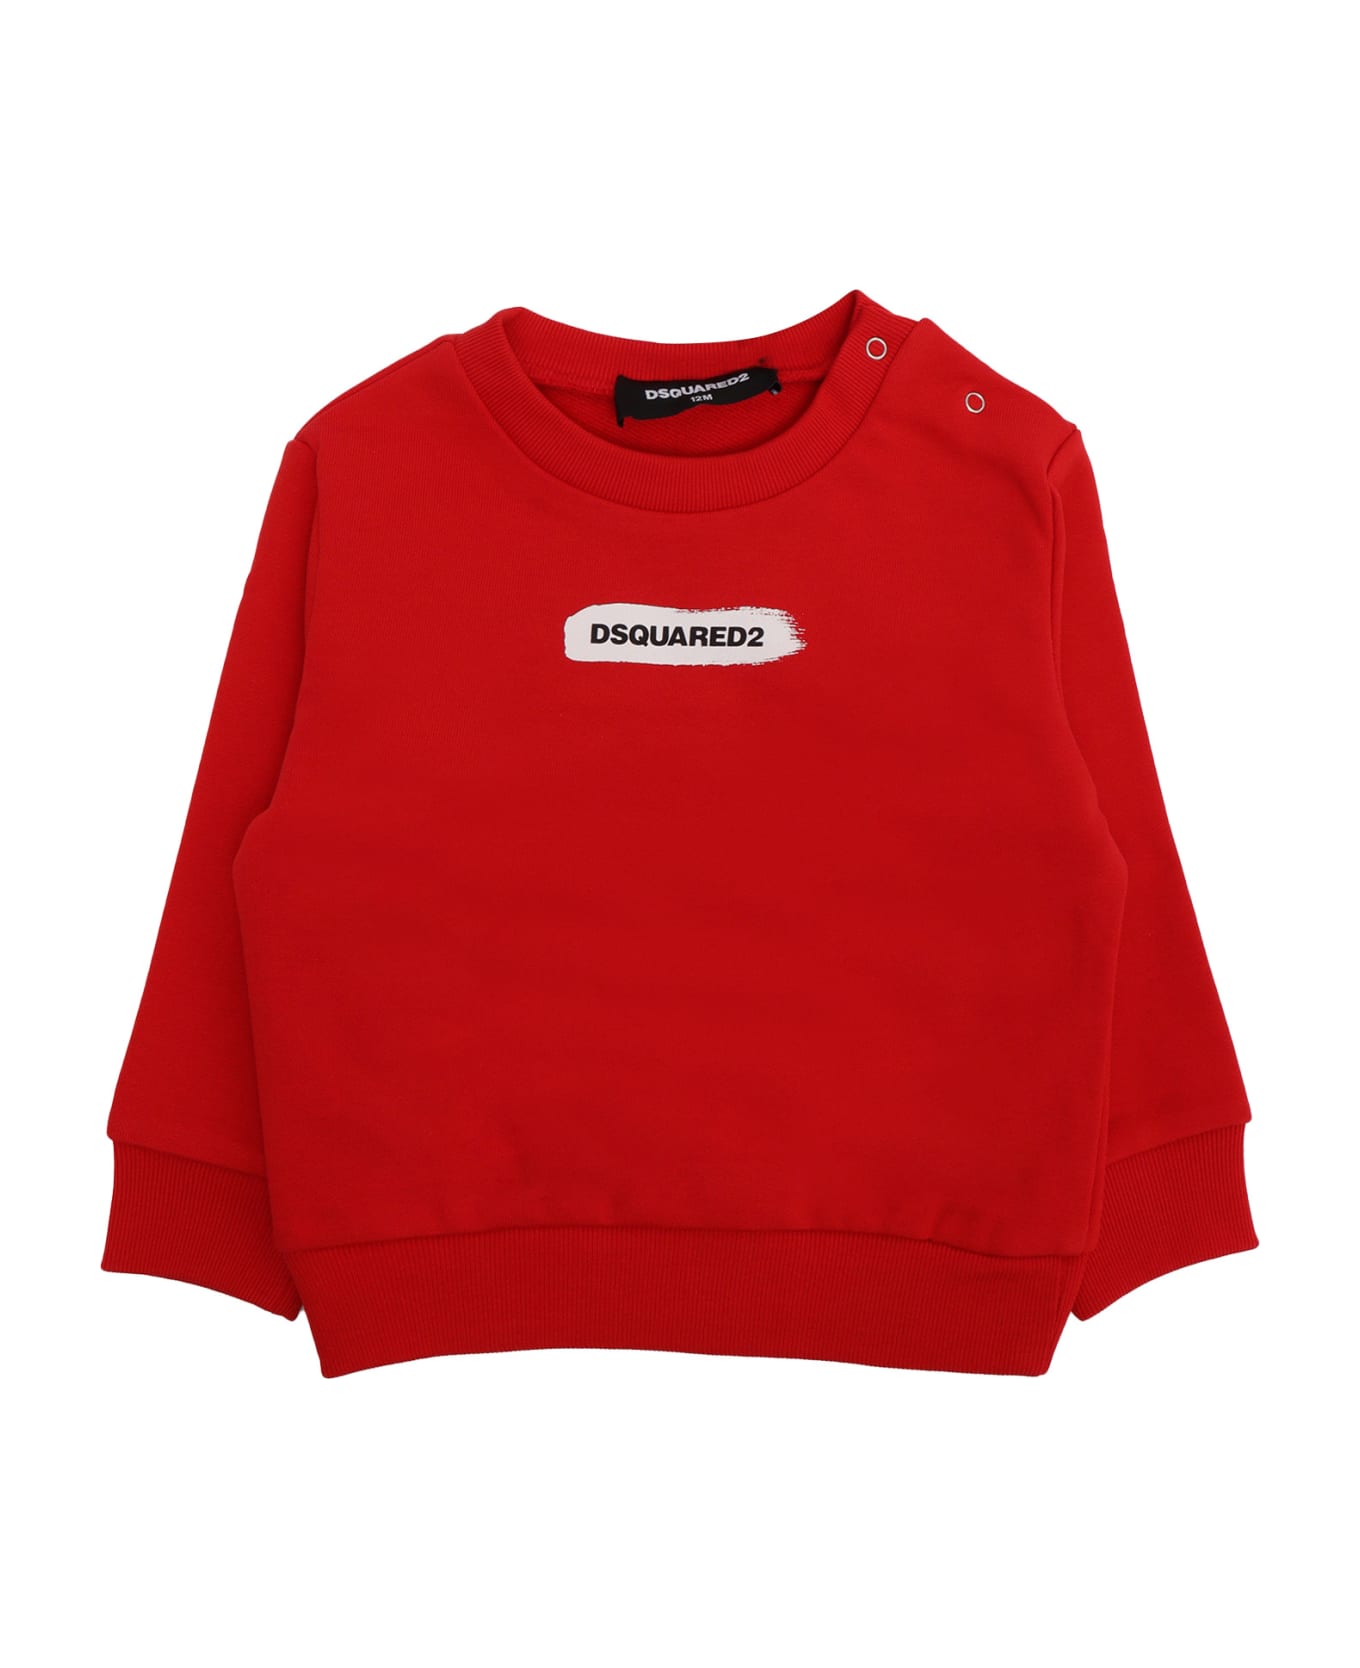 Dsquared2 D-squared2 Sweatshirt For Children - RED